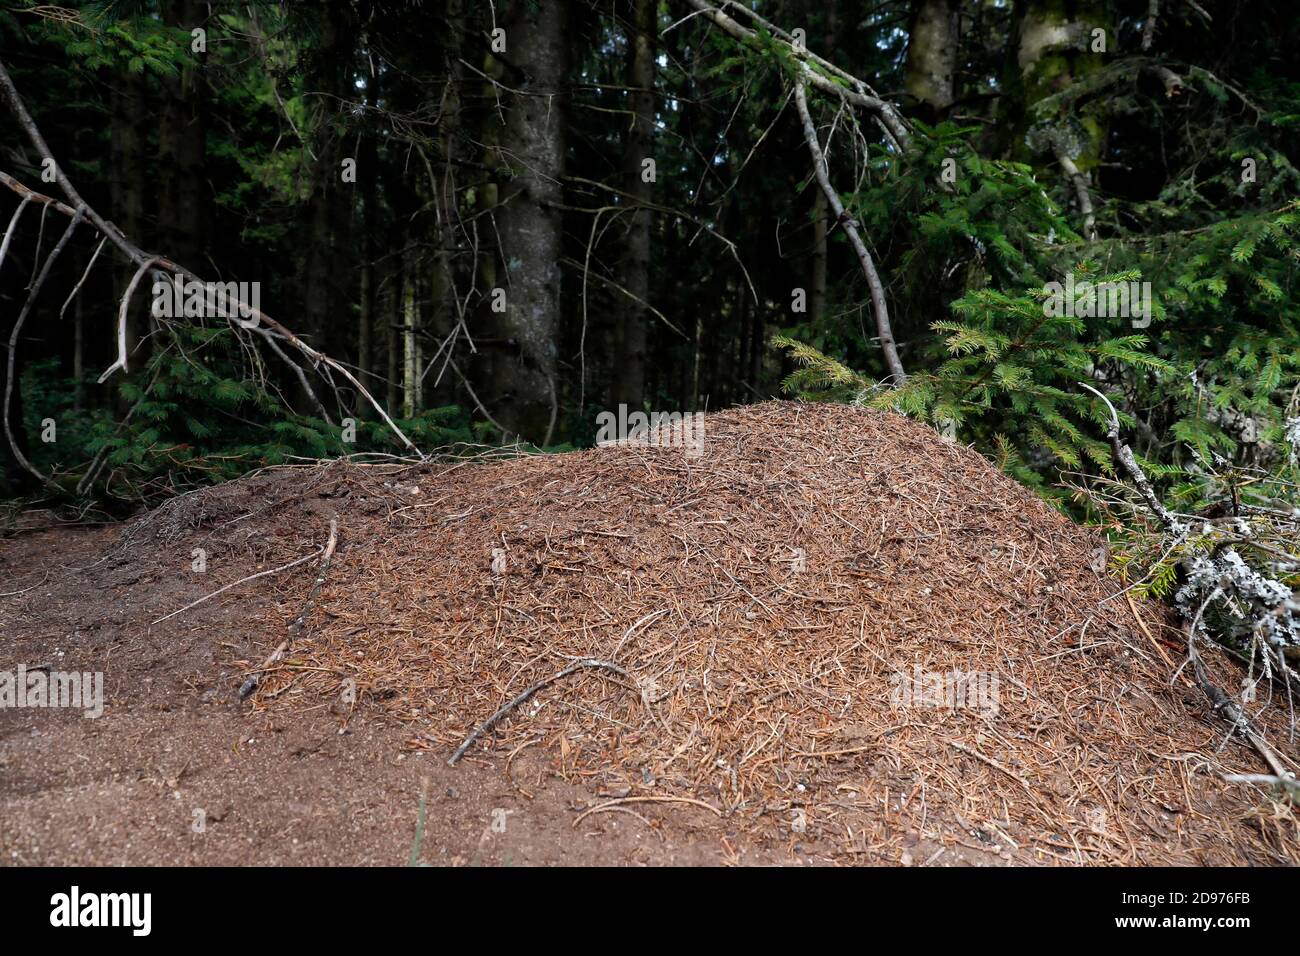 Southern wood ant (Formica rufa), Ant hill at the edge of a fir tree stand in the Vosges Mountains, near the Haut du Tot, Vosges, France Stock Photo